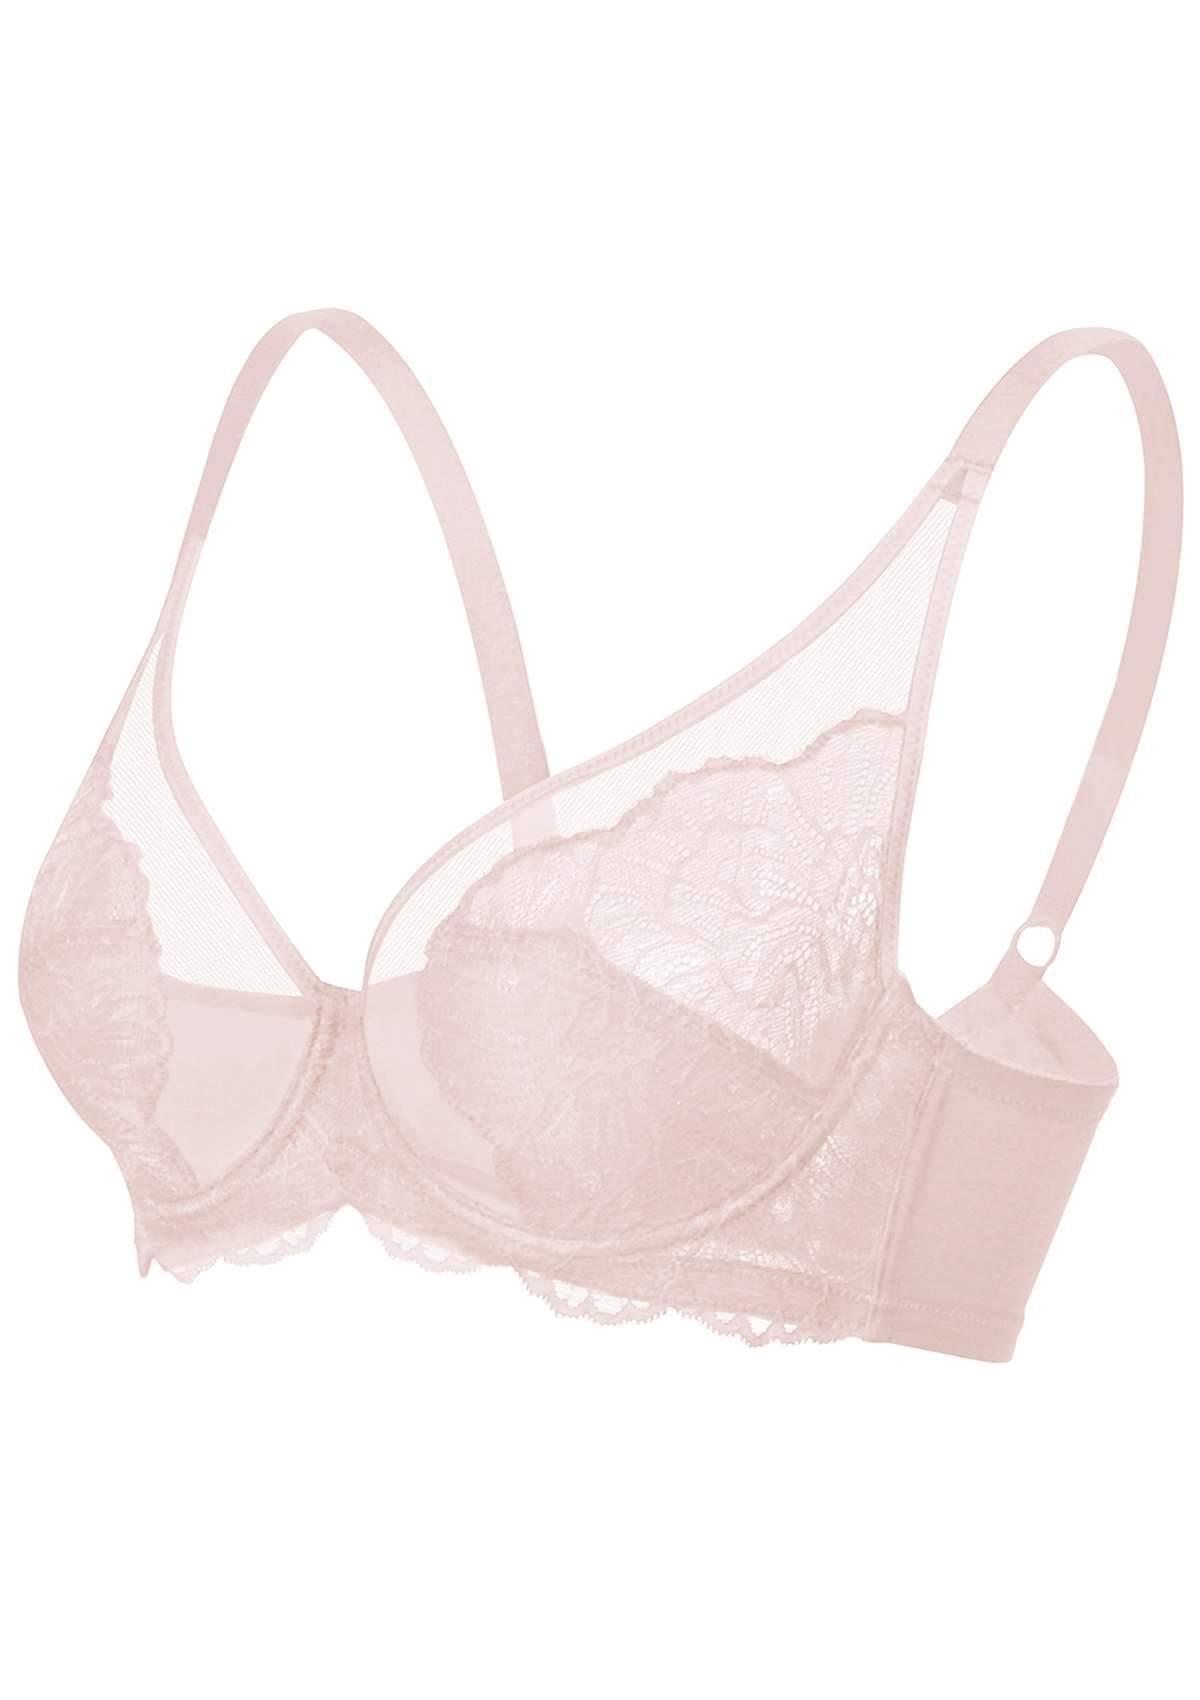 HSIA Blossom Lace Bra And Panties Set: Best Bra For Large Busts - Dark Pink / 44 / H